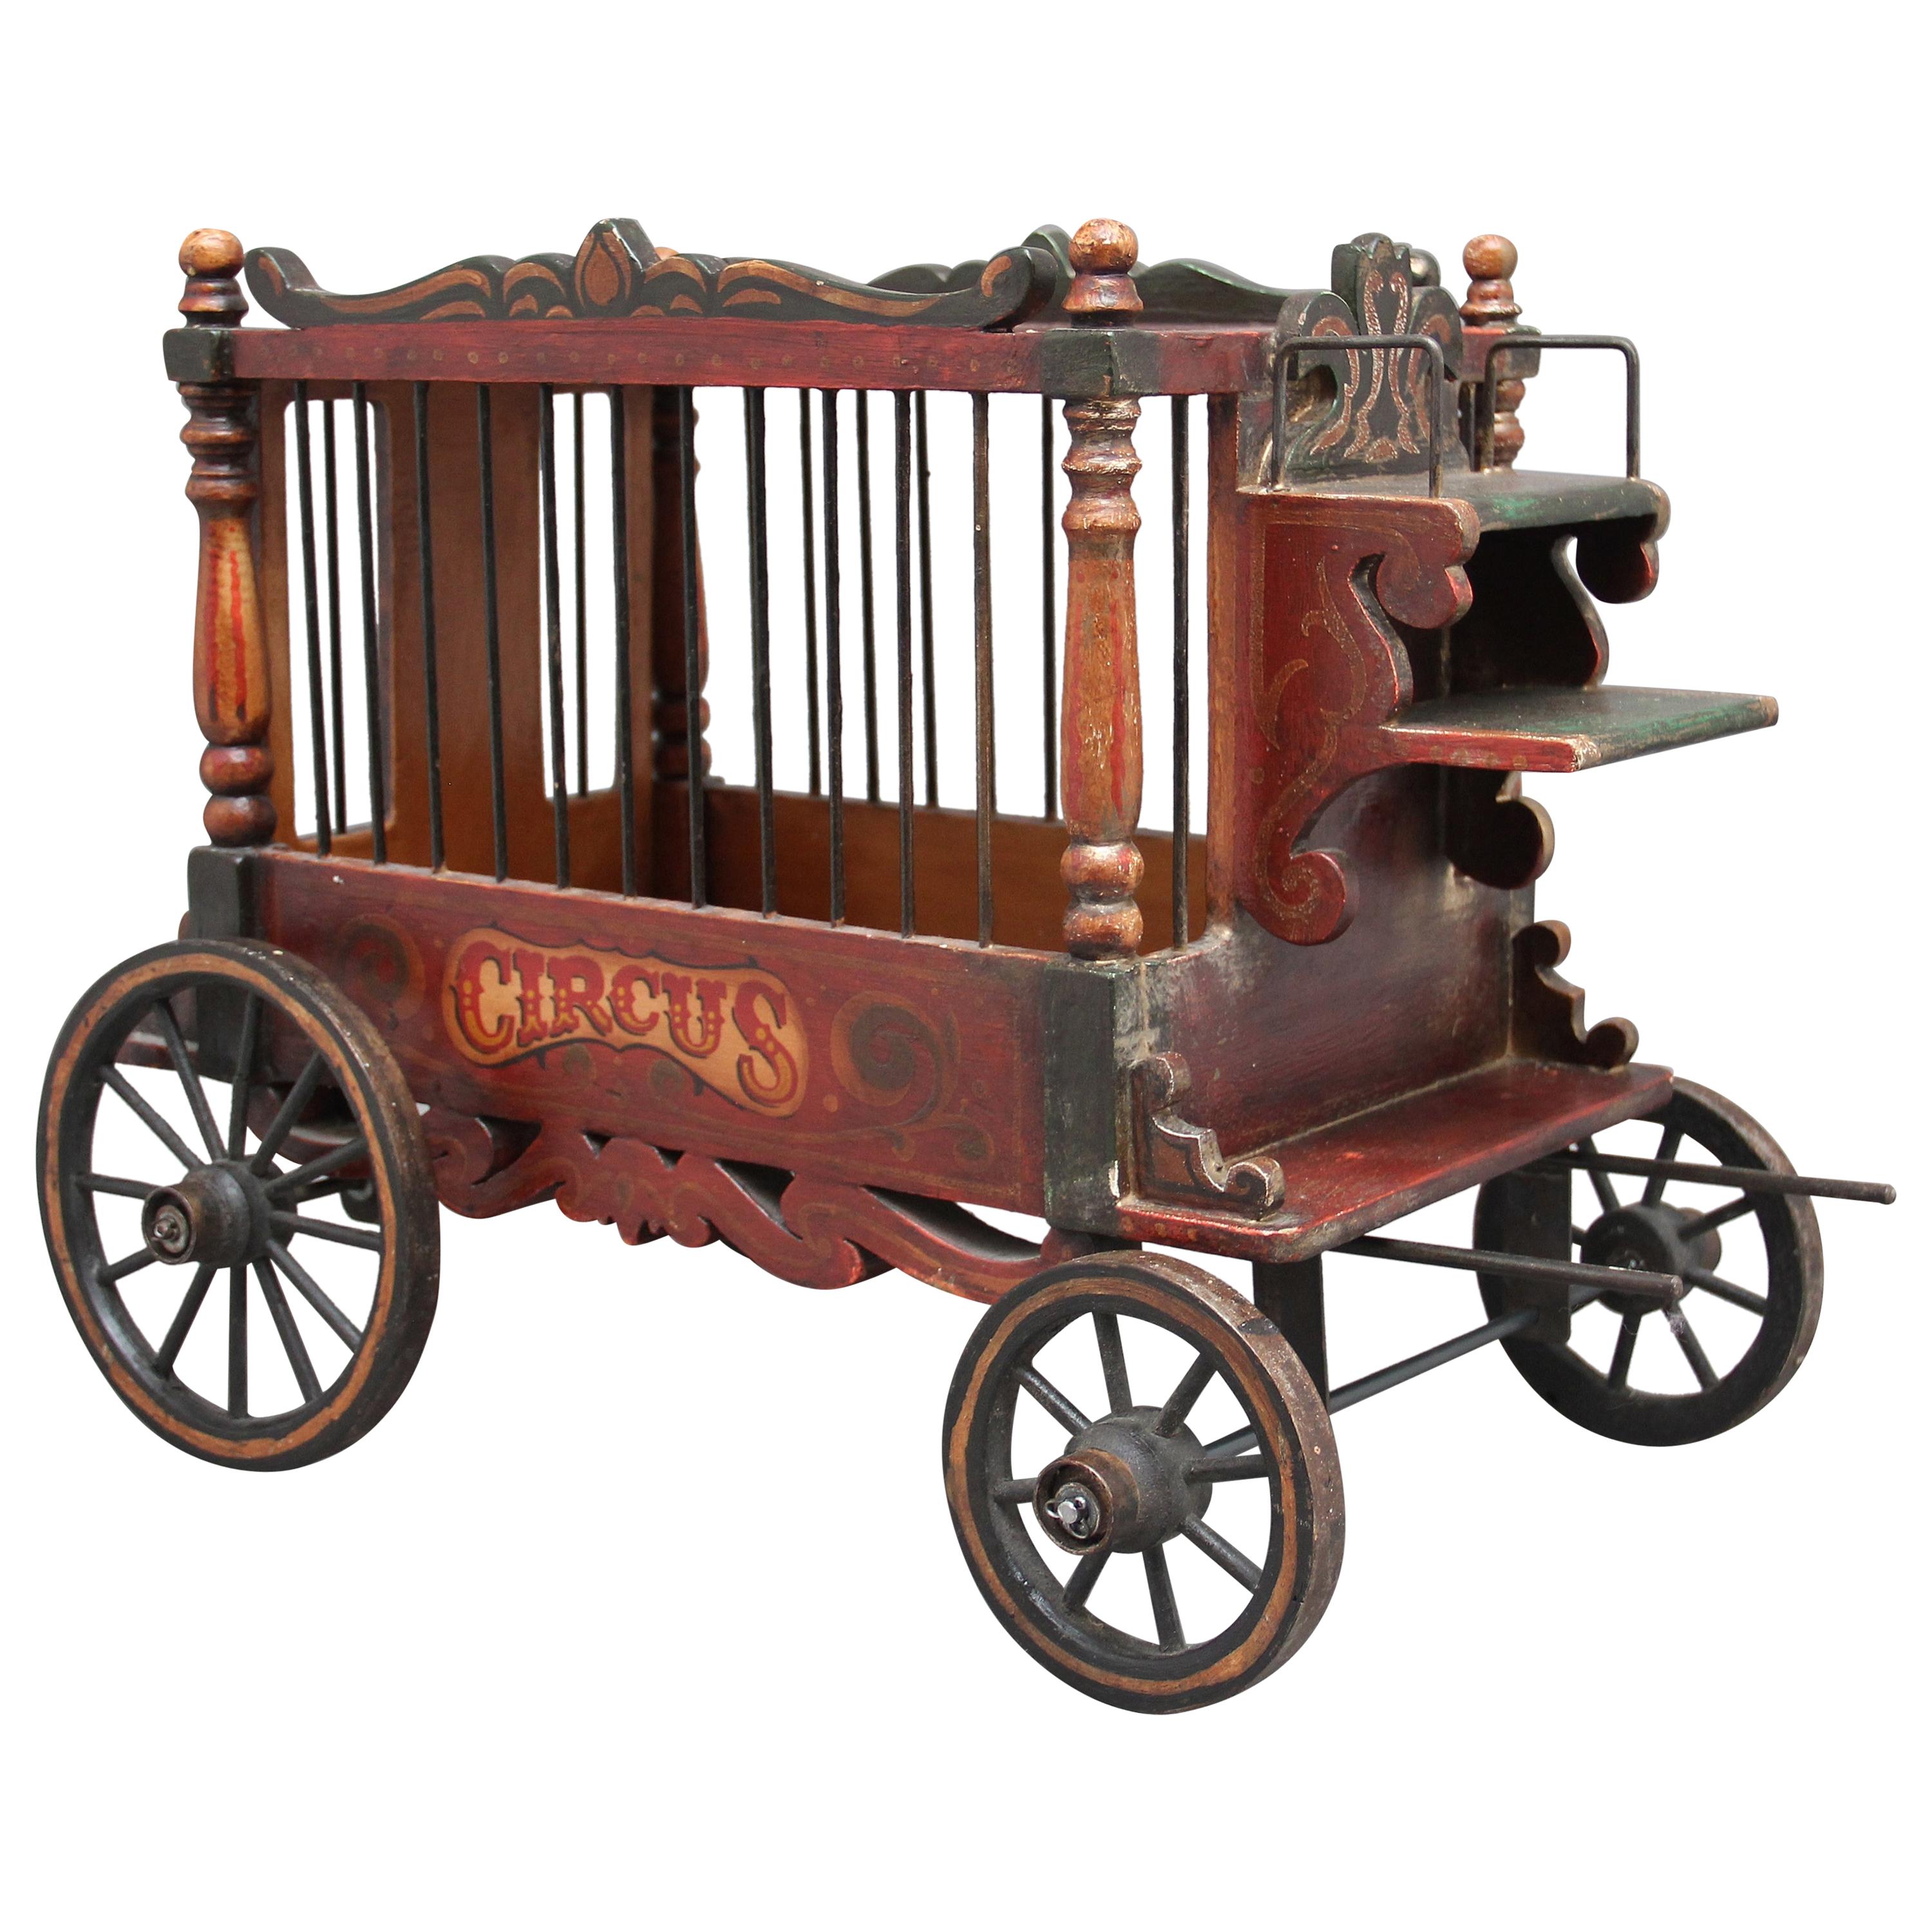 Early 20th Century Model of a Circus Wagon